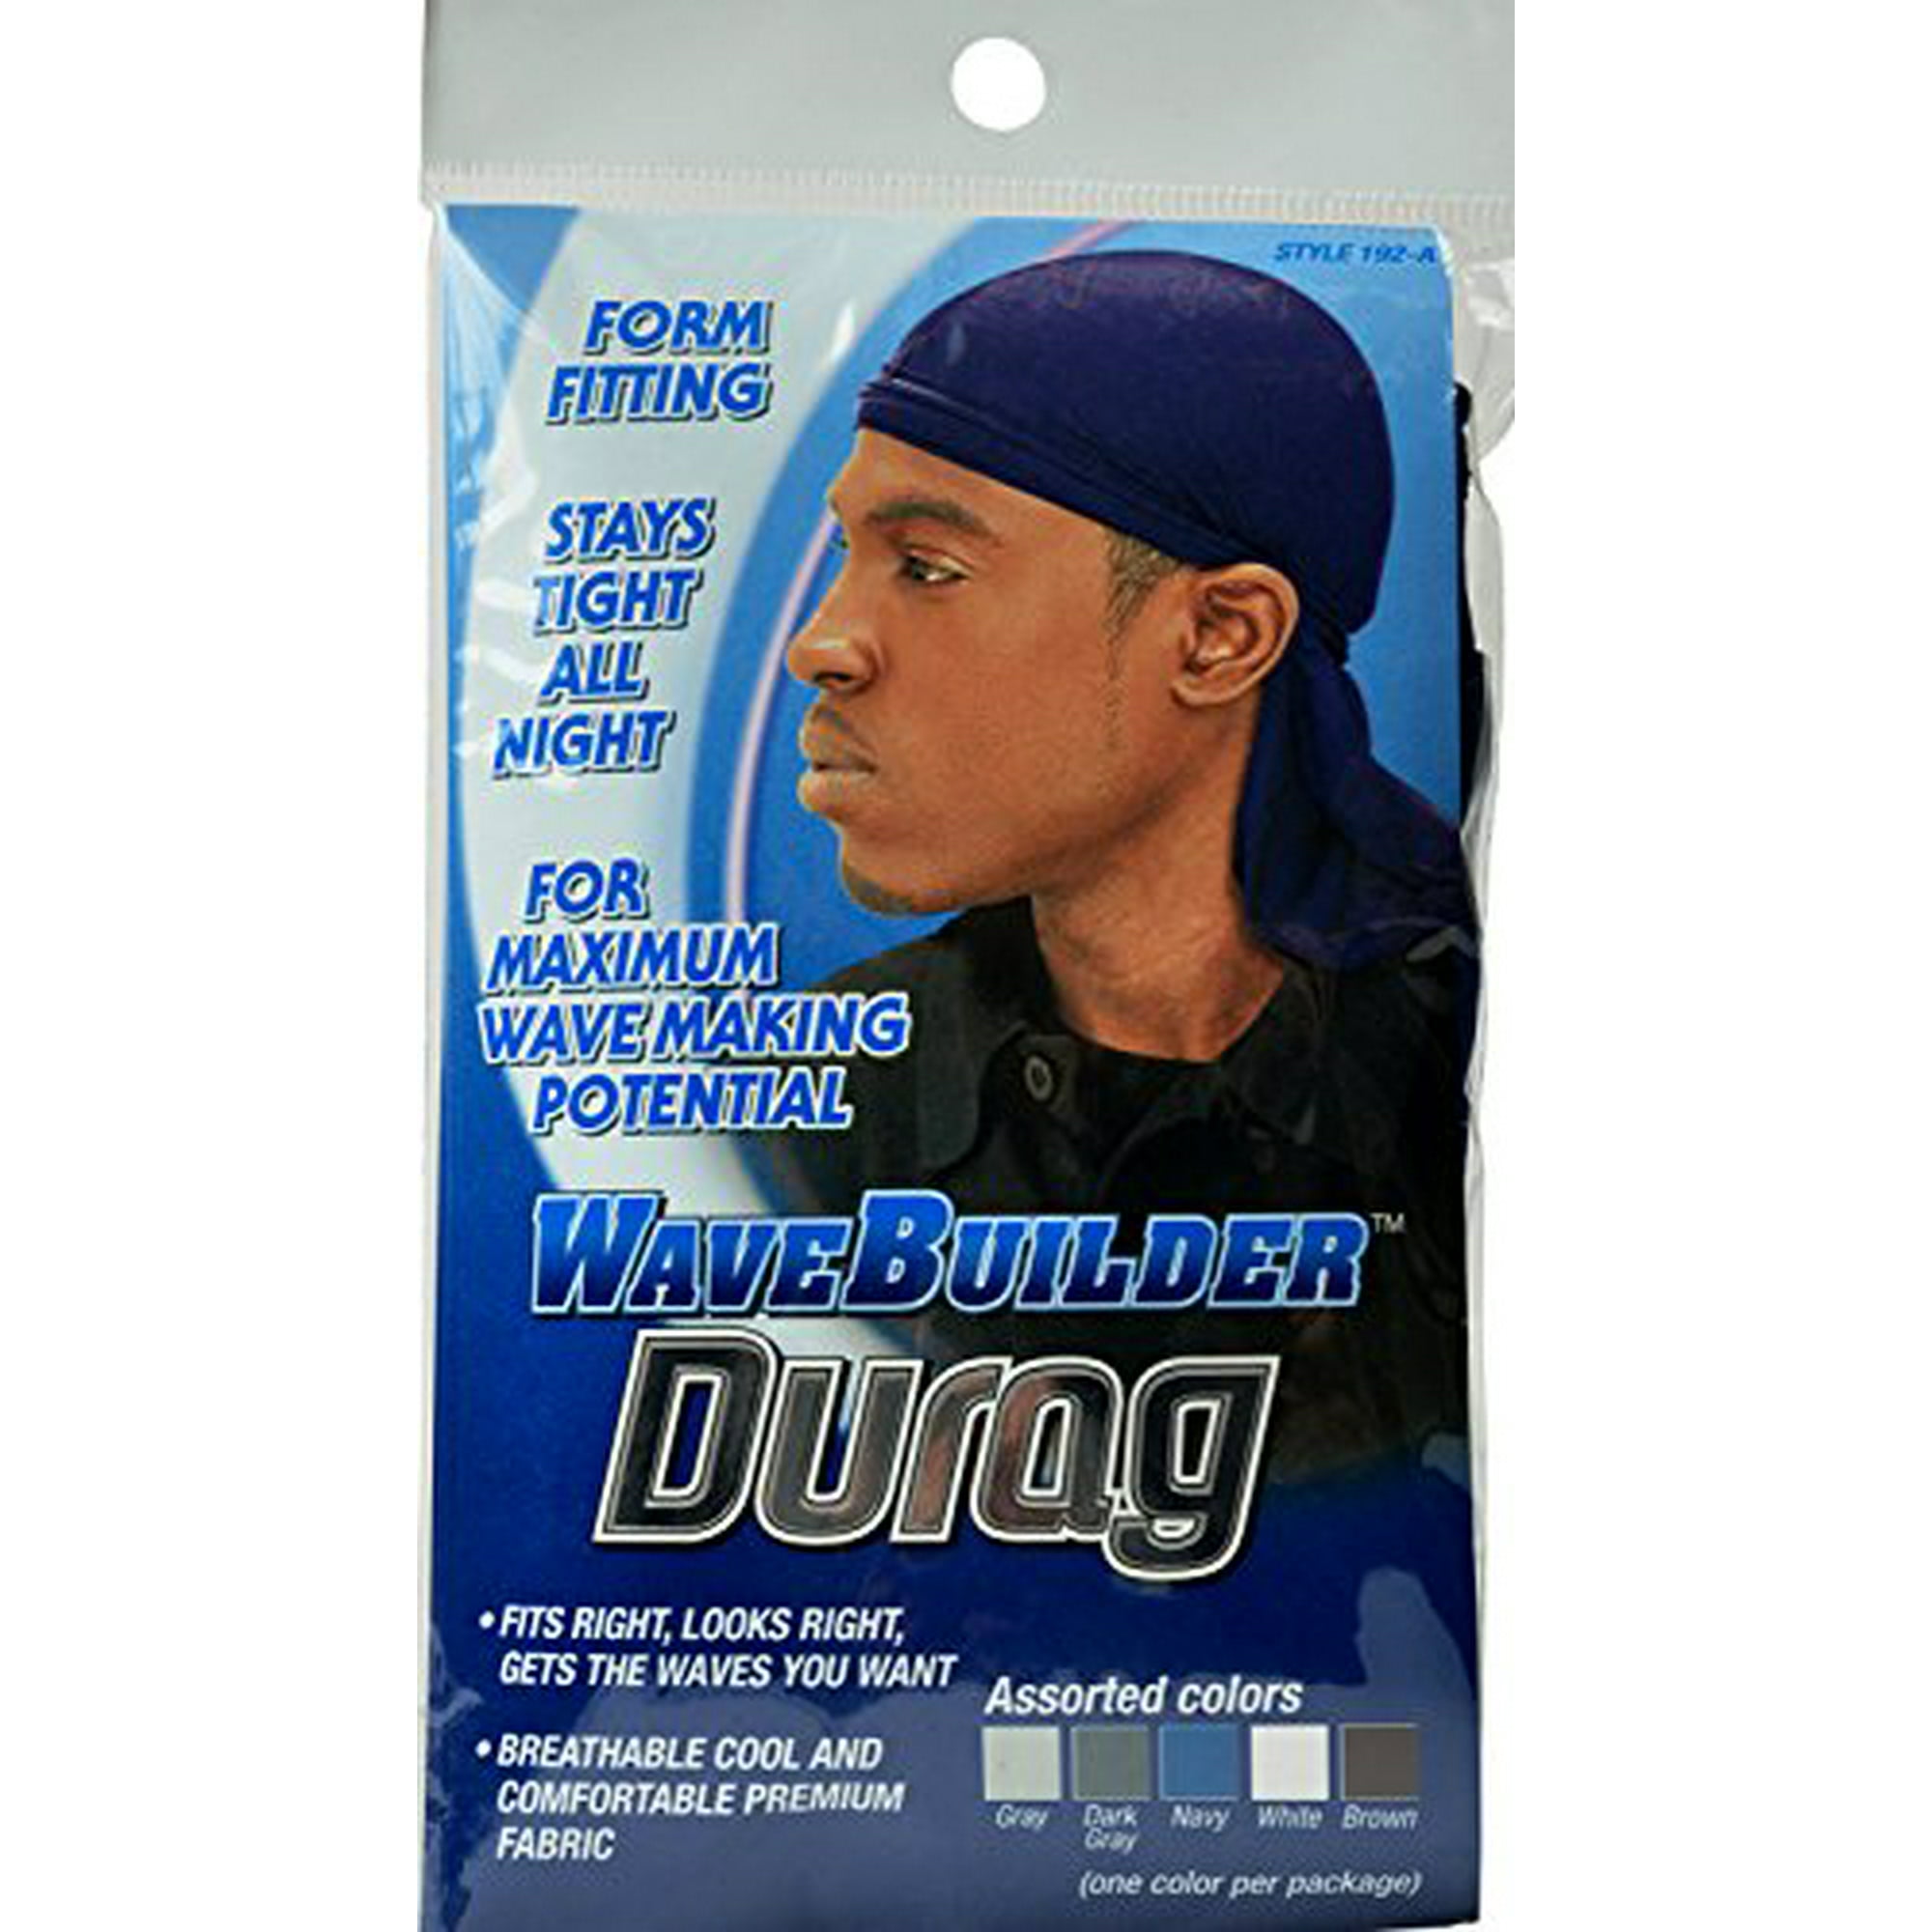 Wavebuilder Premium Stretch Durag for and Hair Waves, Assorted (Color May Vary) (192-A) | Walmart Canada